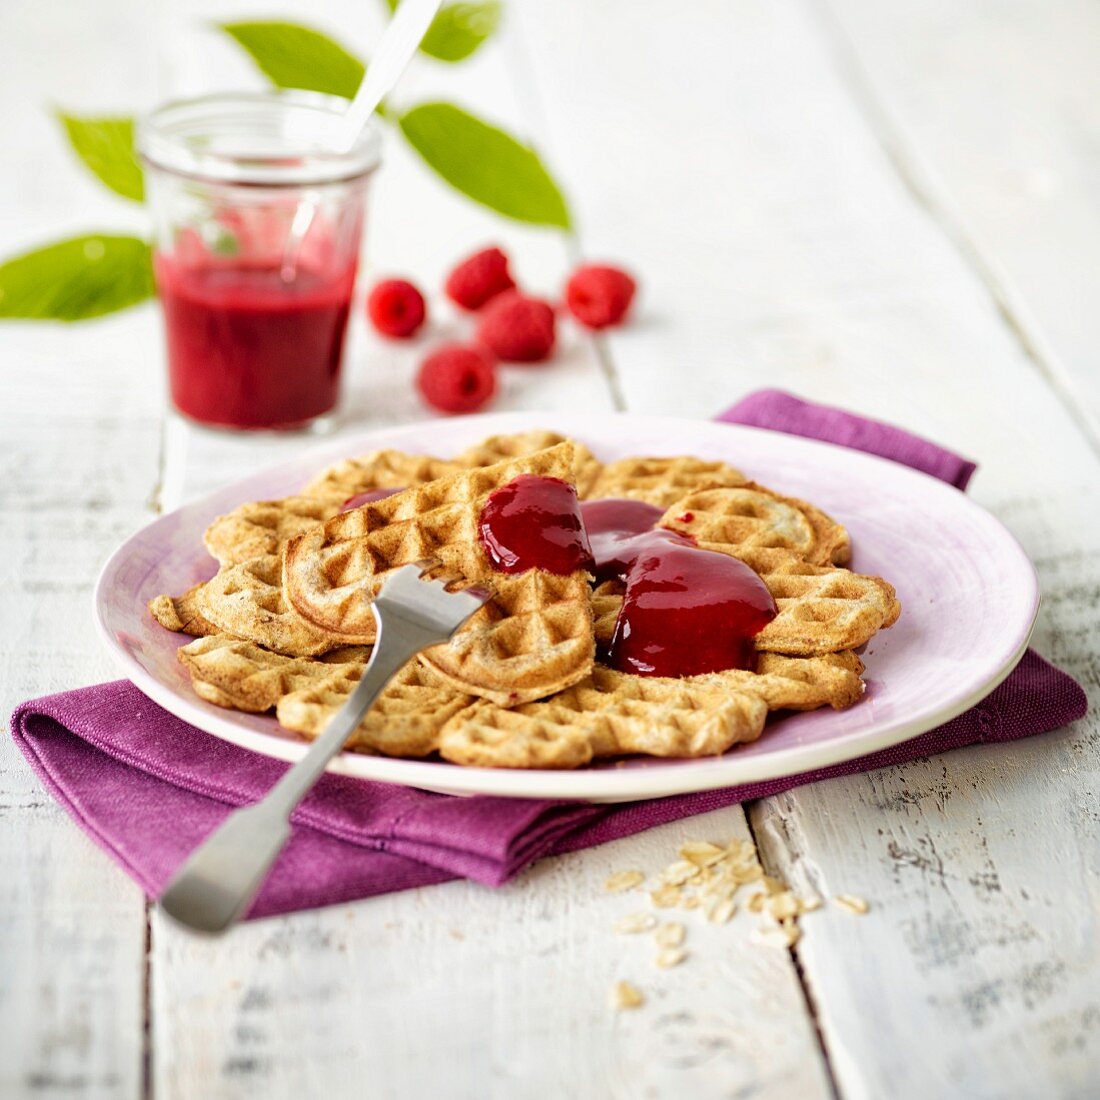 Wholemeal waffles with raspberry sauce